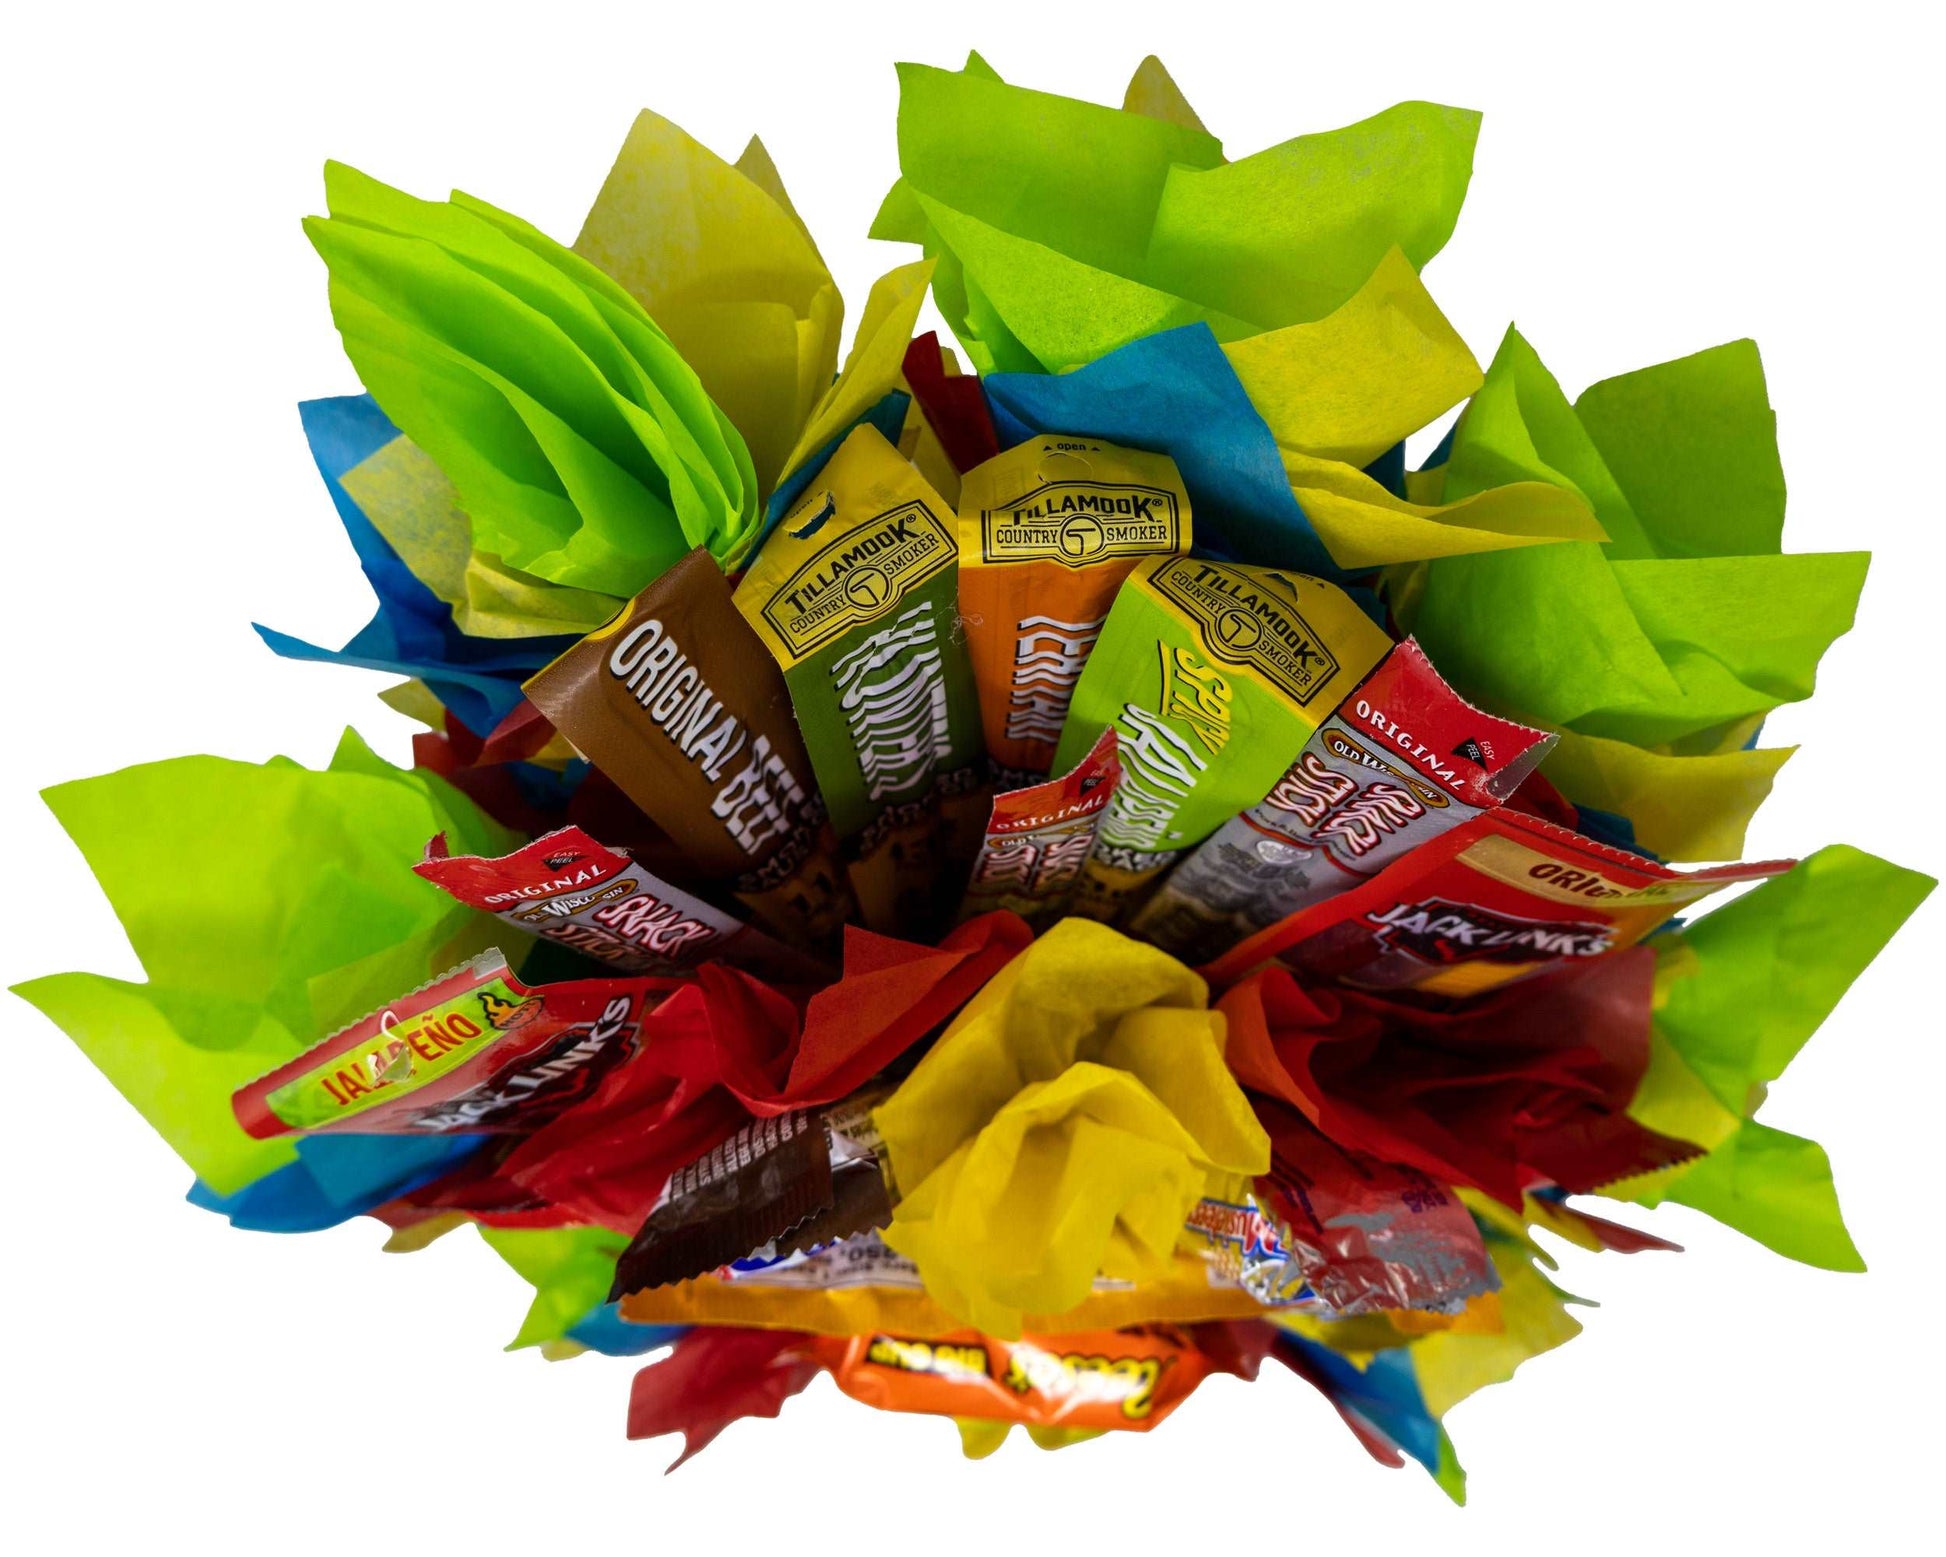 Beef Jerky Candy Bouquet | Great Gift for Men